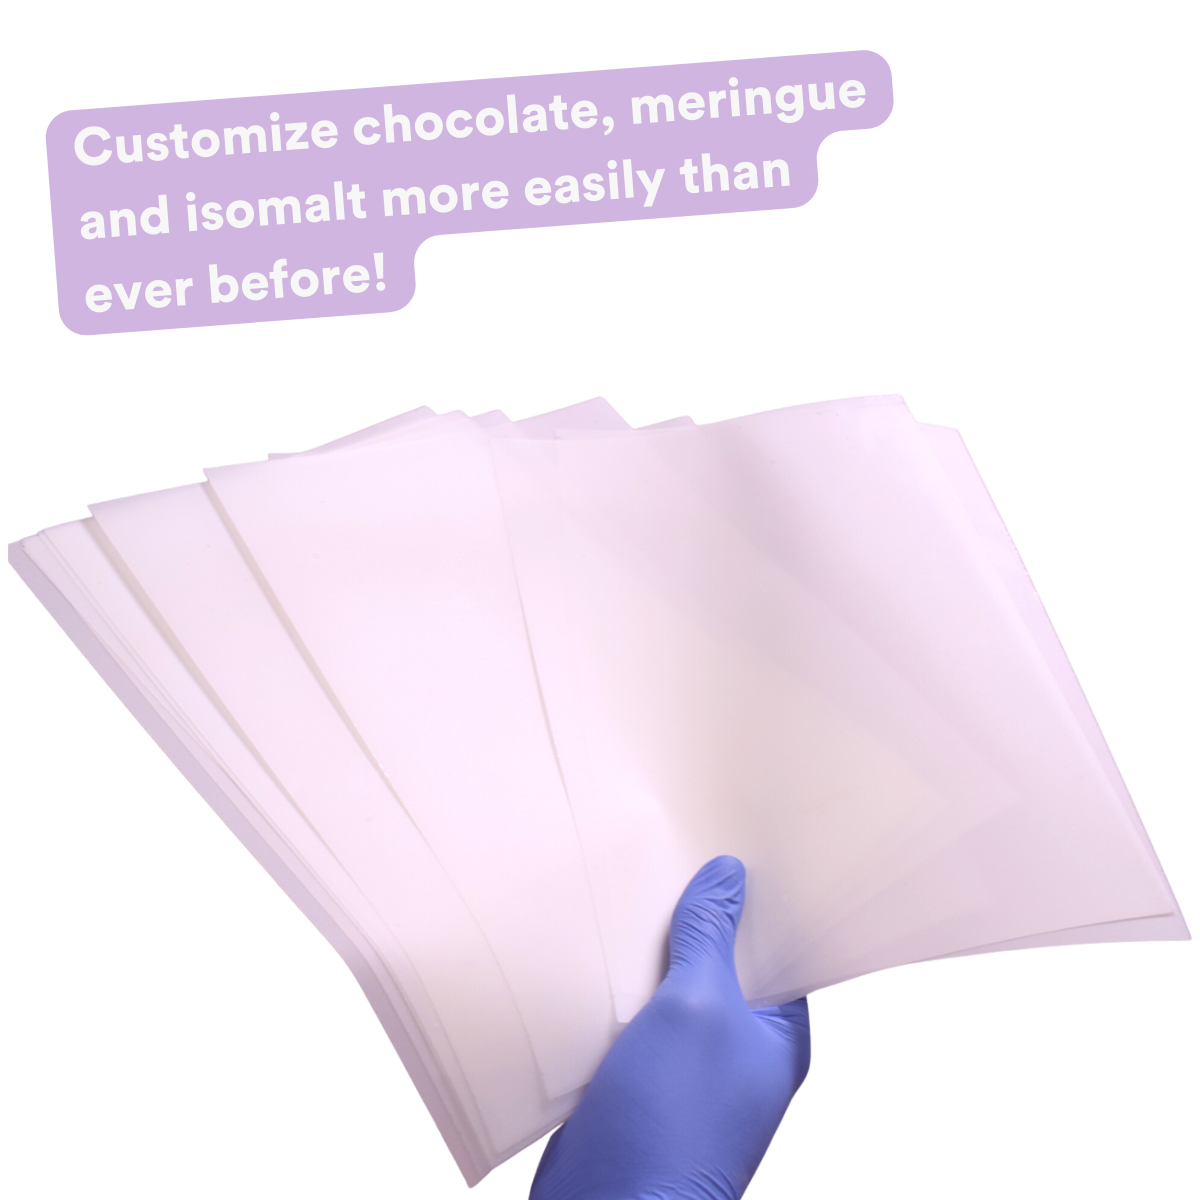 Print on chocolate w/ paper2eat Miracle Transfer Sheets for $39.99 